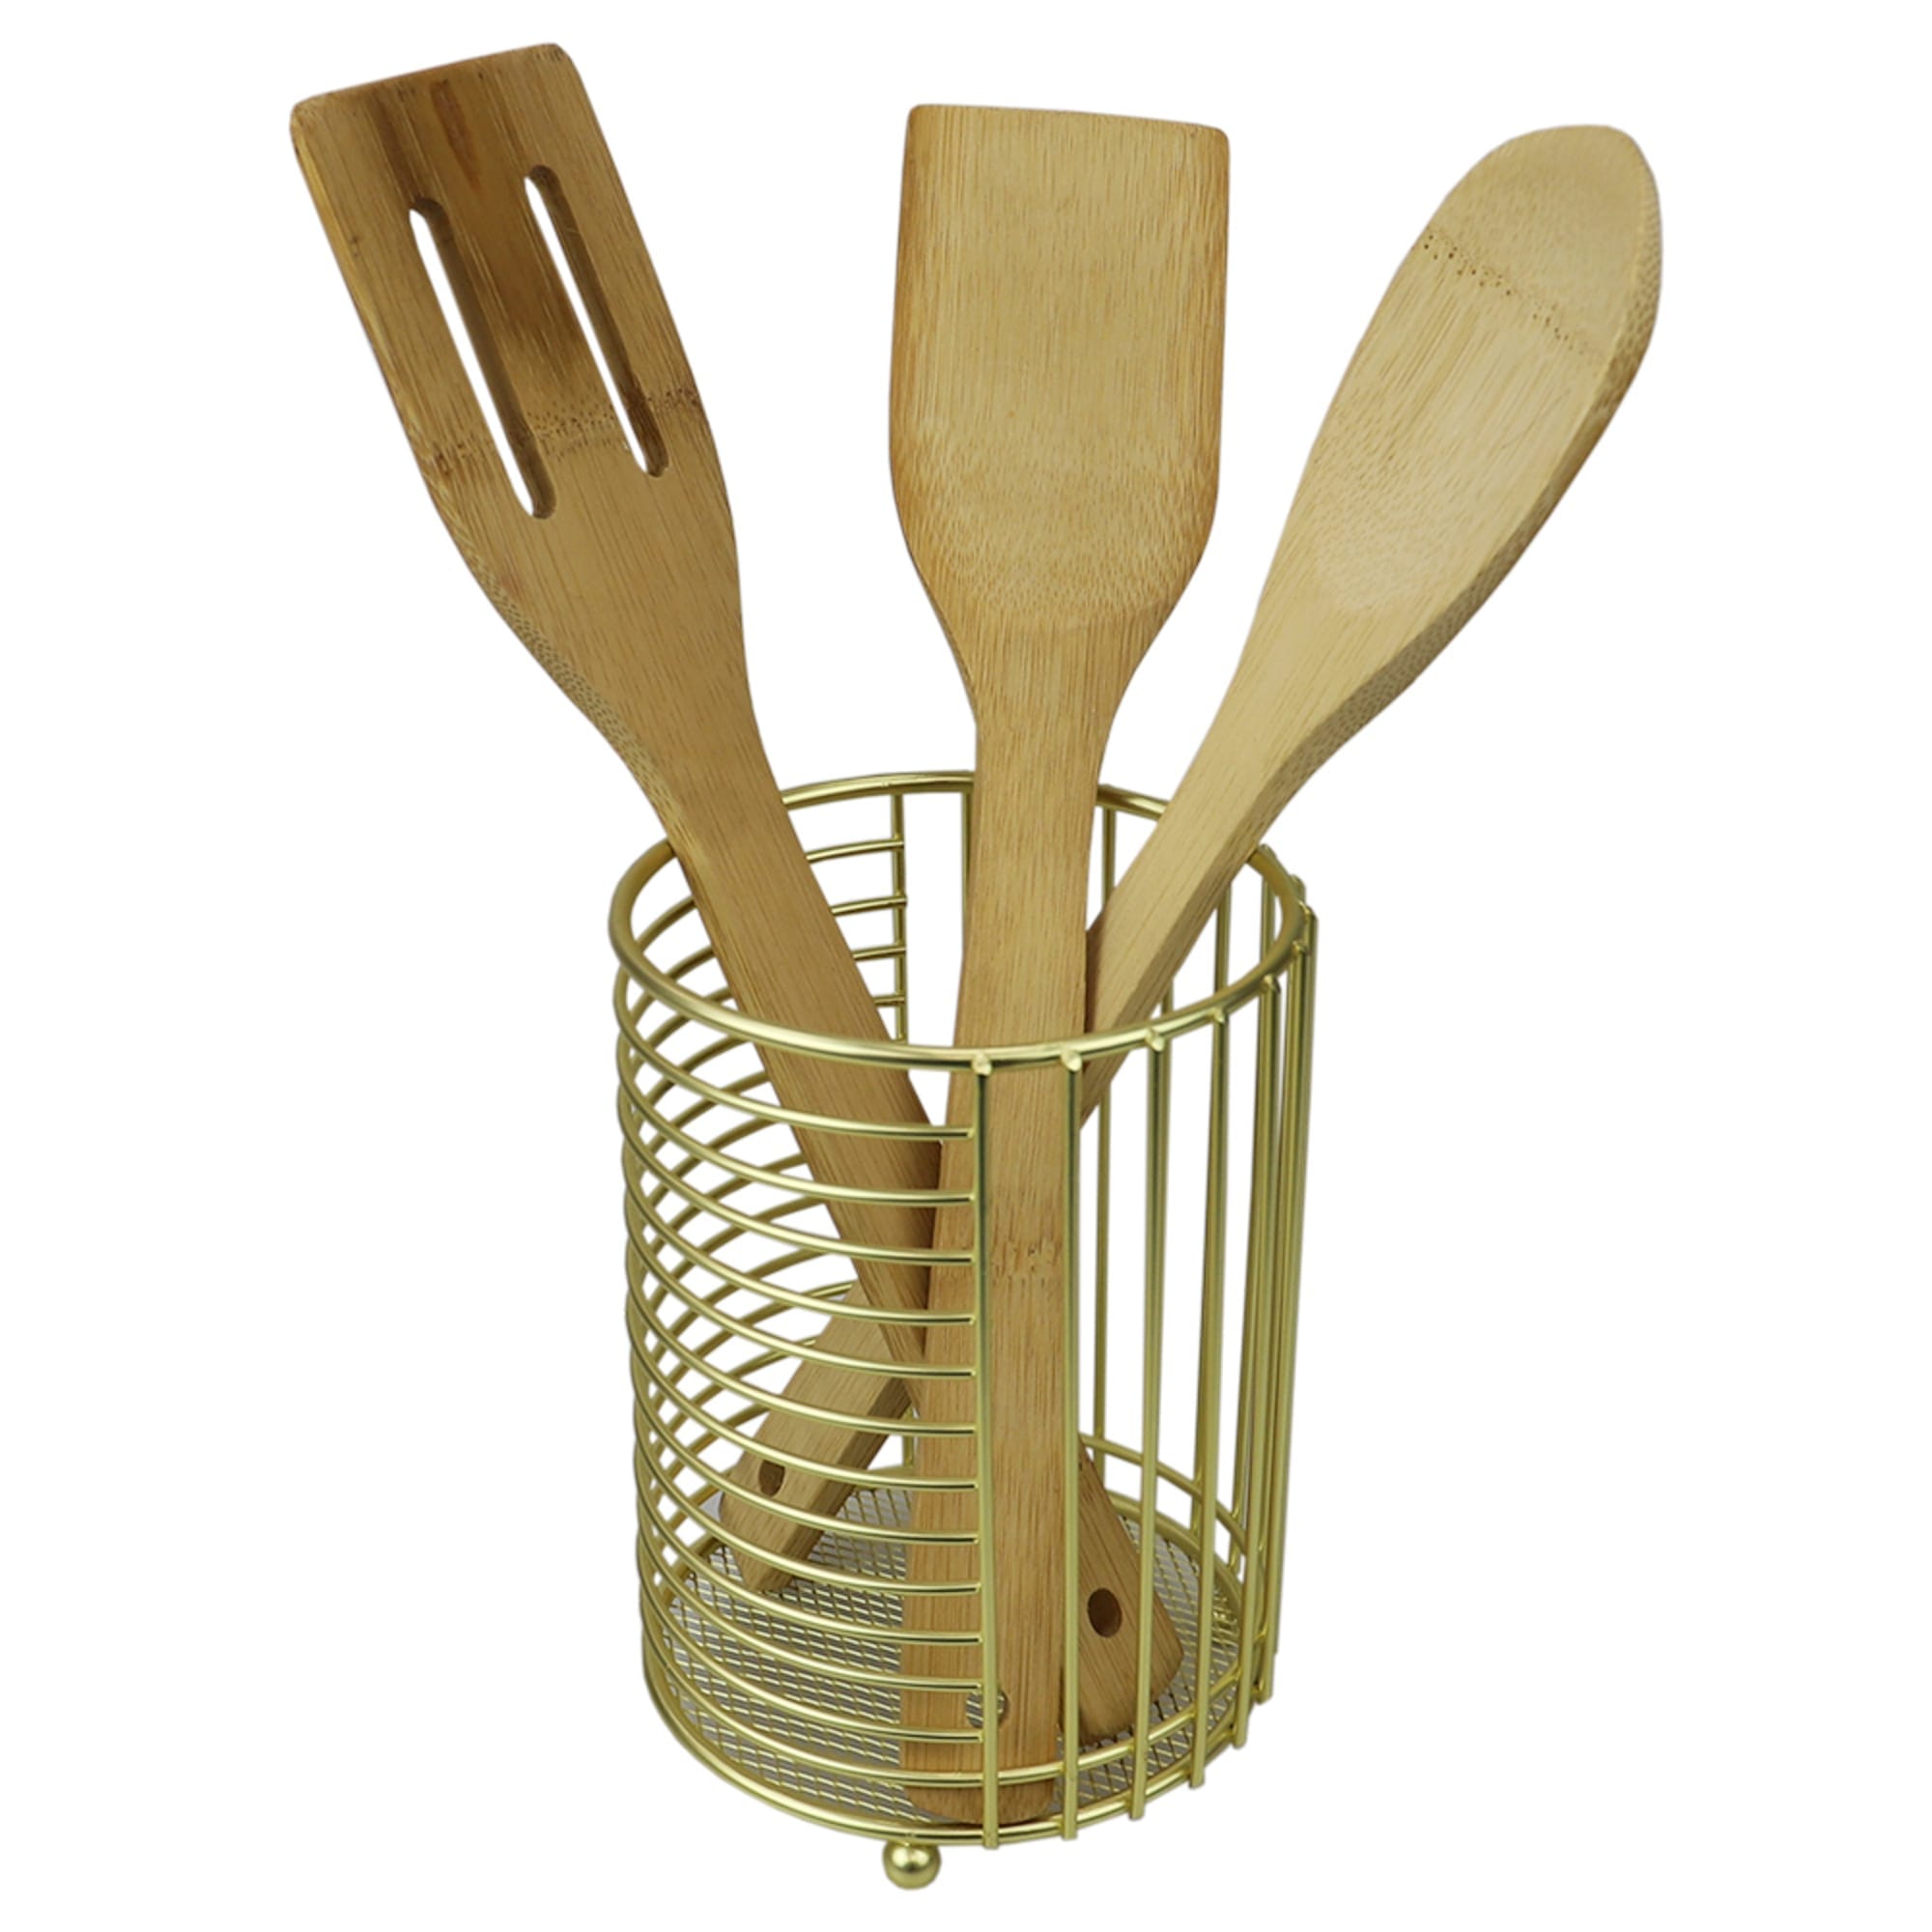 Home Basics Halo Steel Cutlery Holder with Mesh Bottom and Non-Skid Feet, Gold $4.00 EACH, CASE PACK OF 12